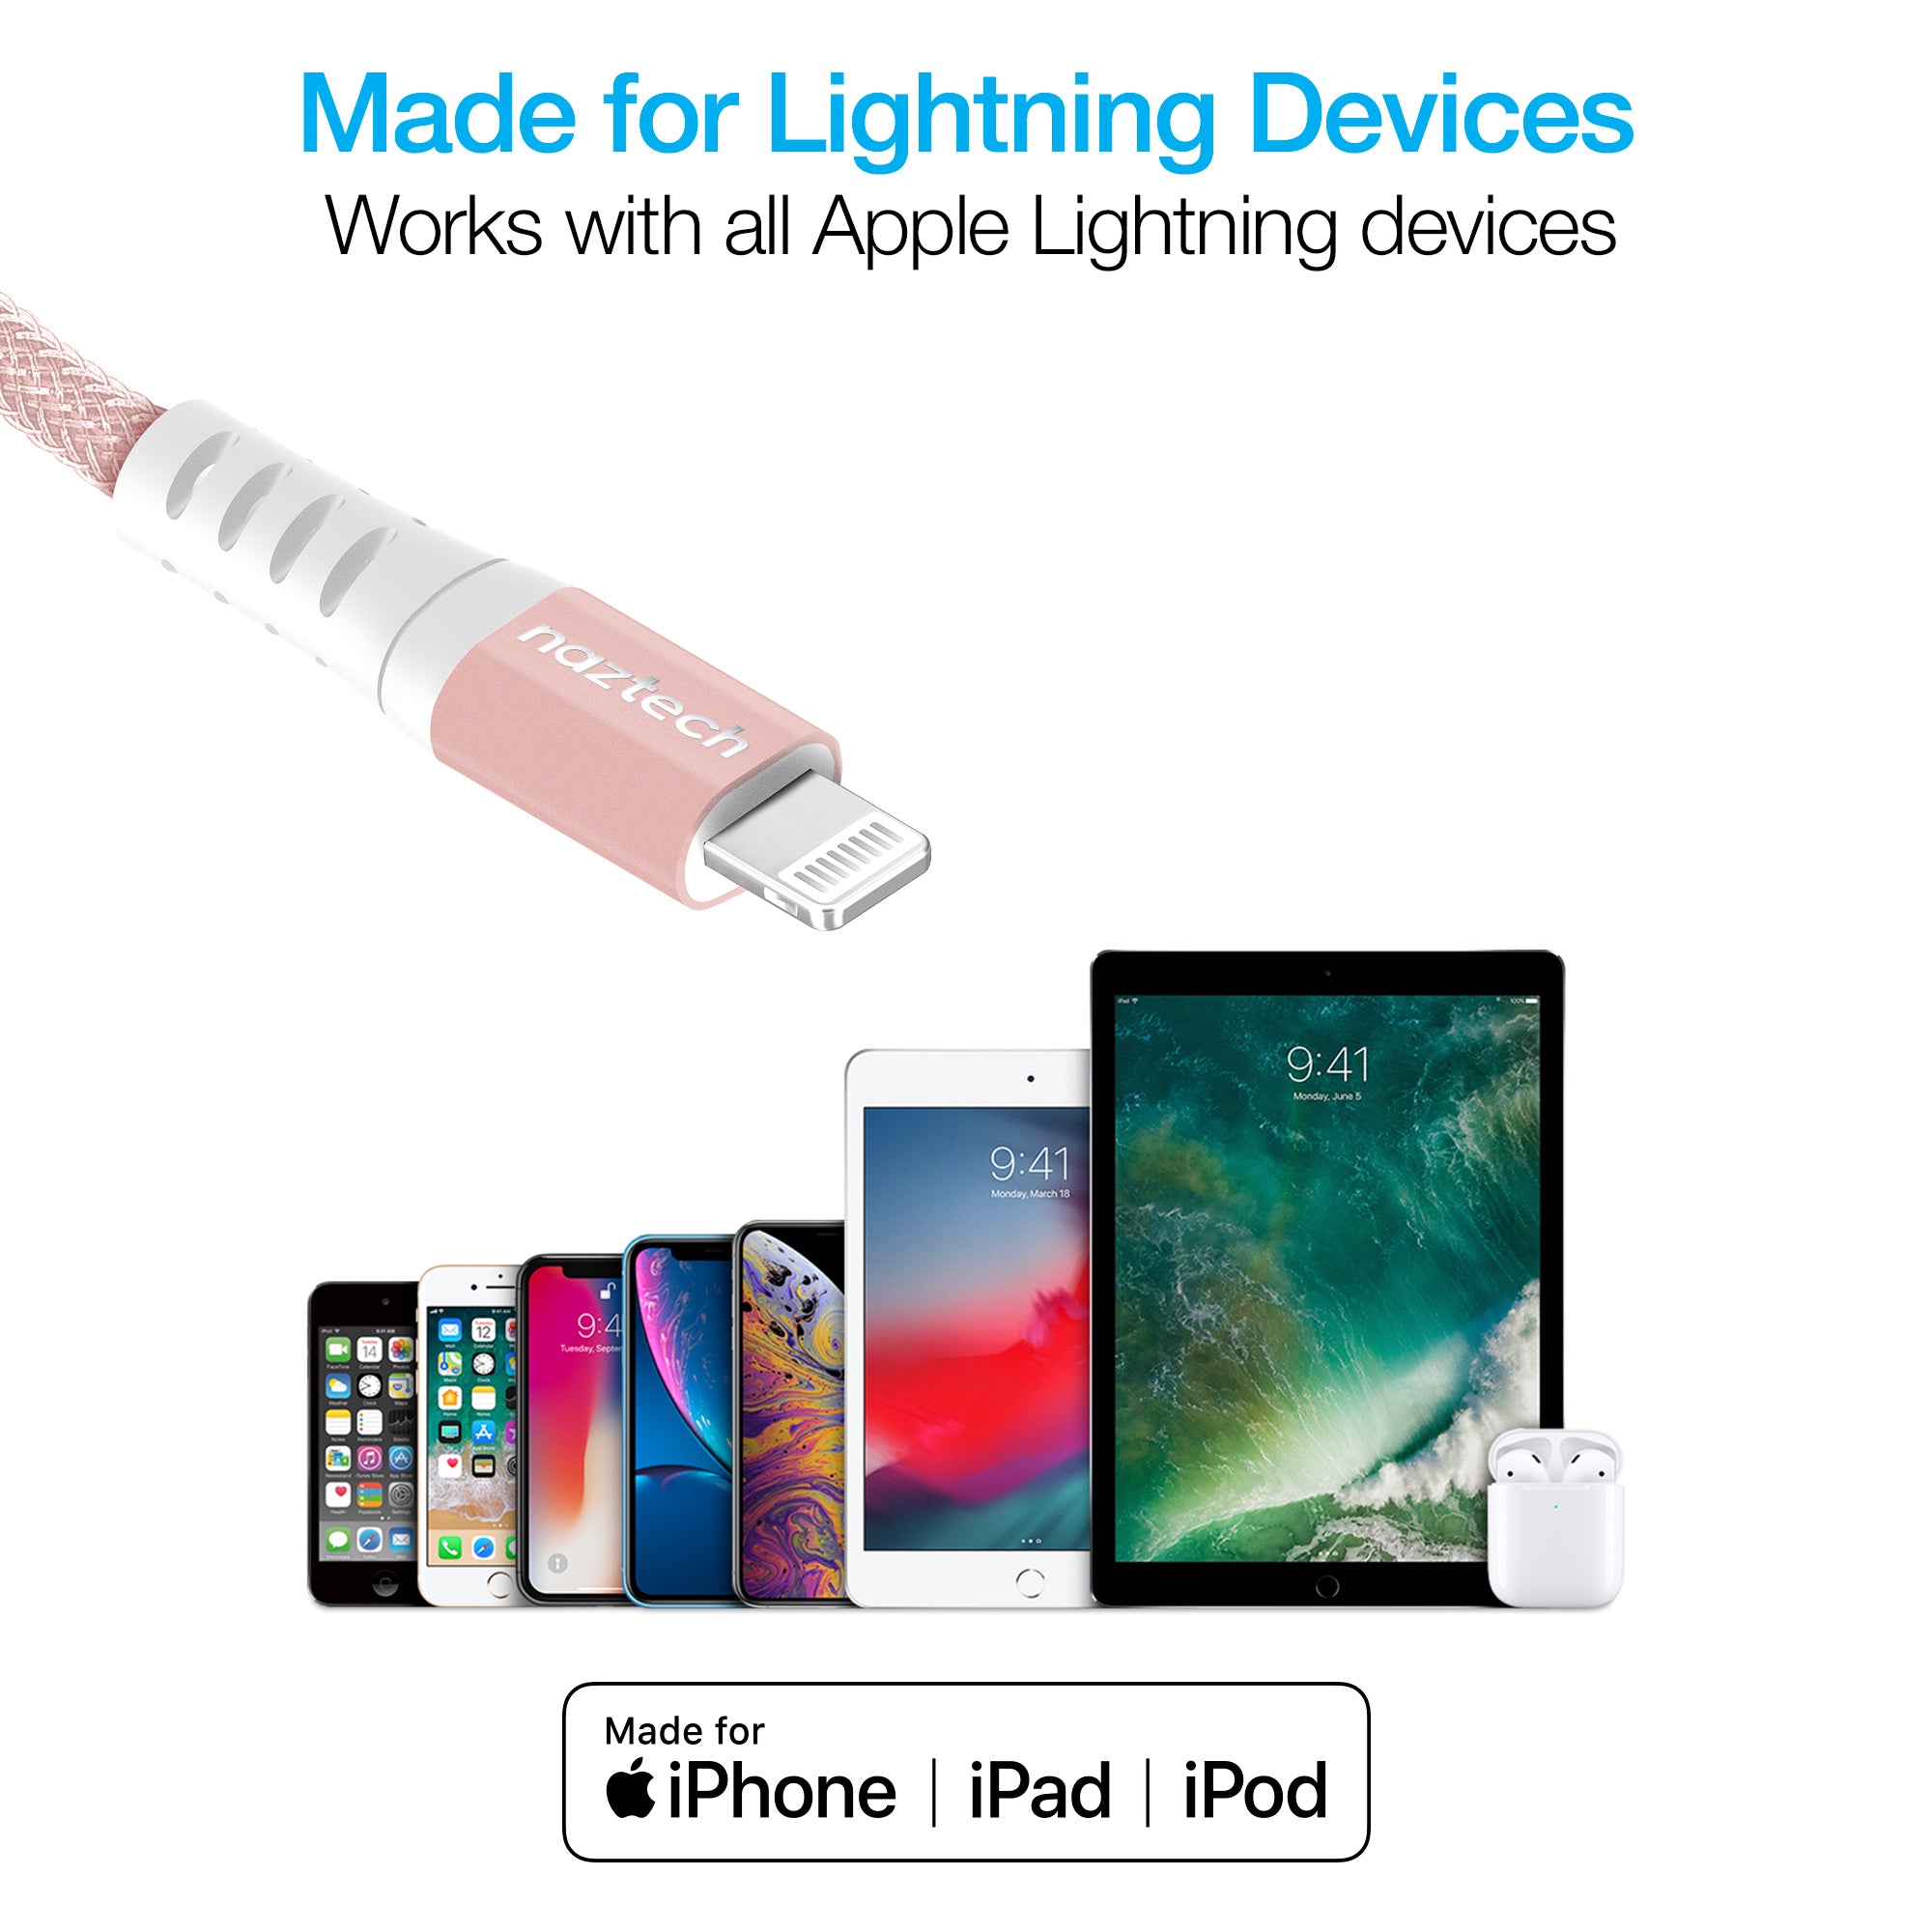 Braided Apple iPhone lightning cable pictured, expected to ship